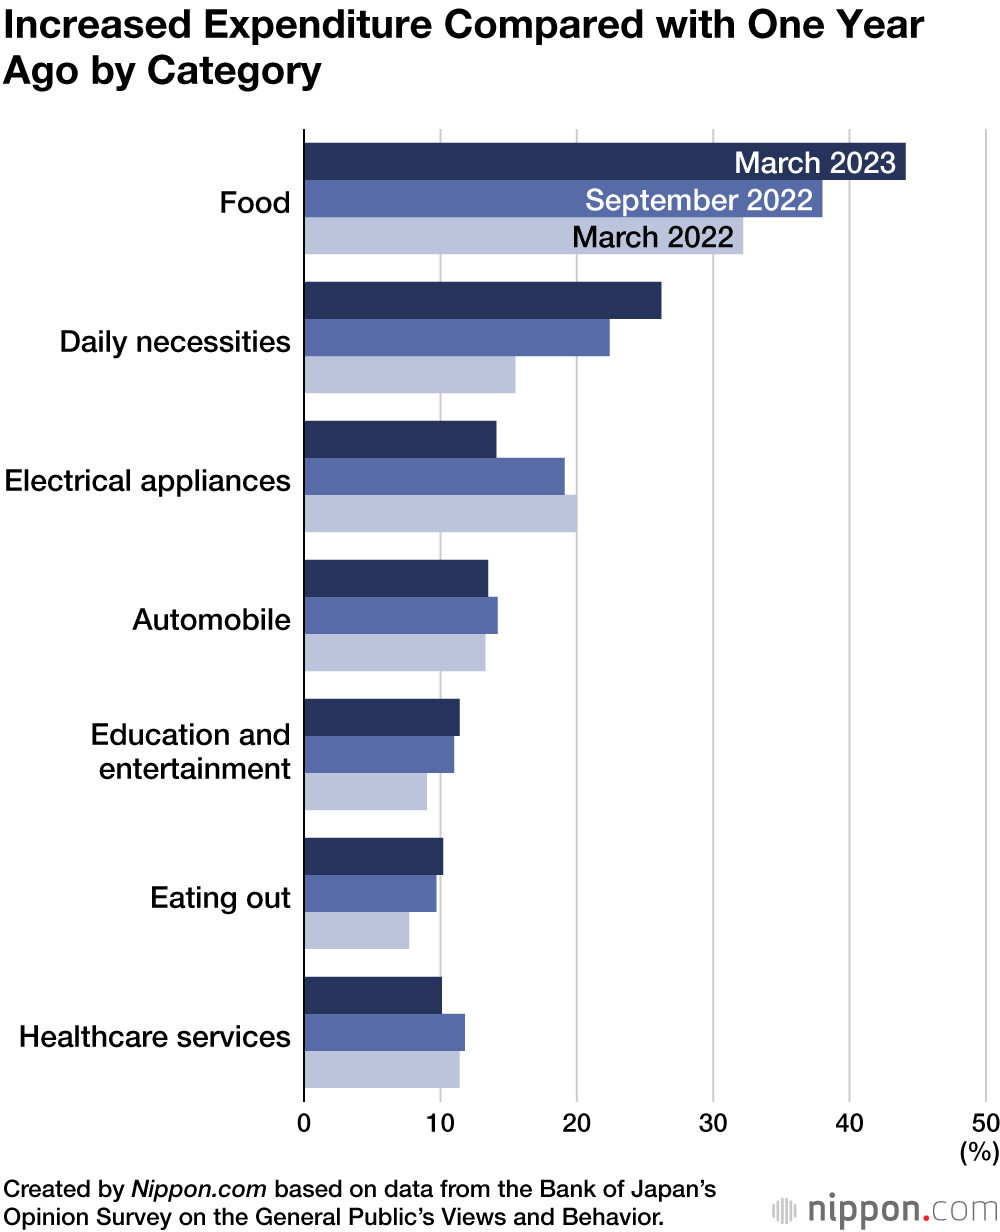 Increased Expenditure Compared with One Year Ago by Category